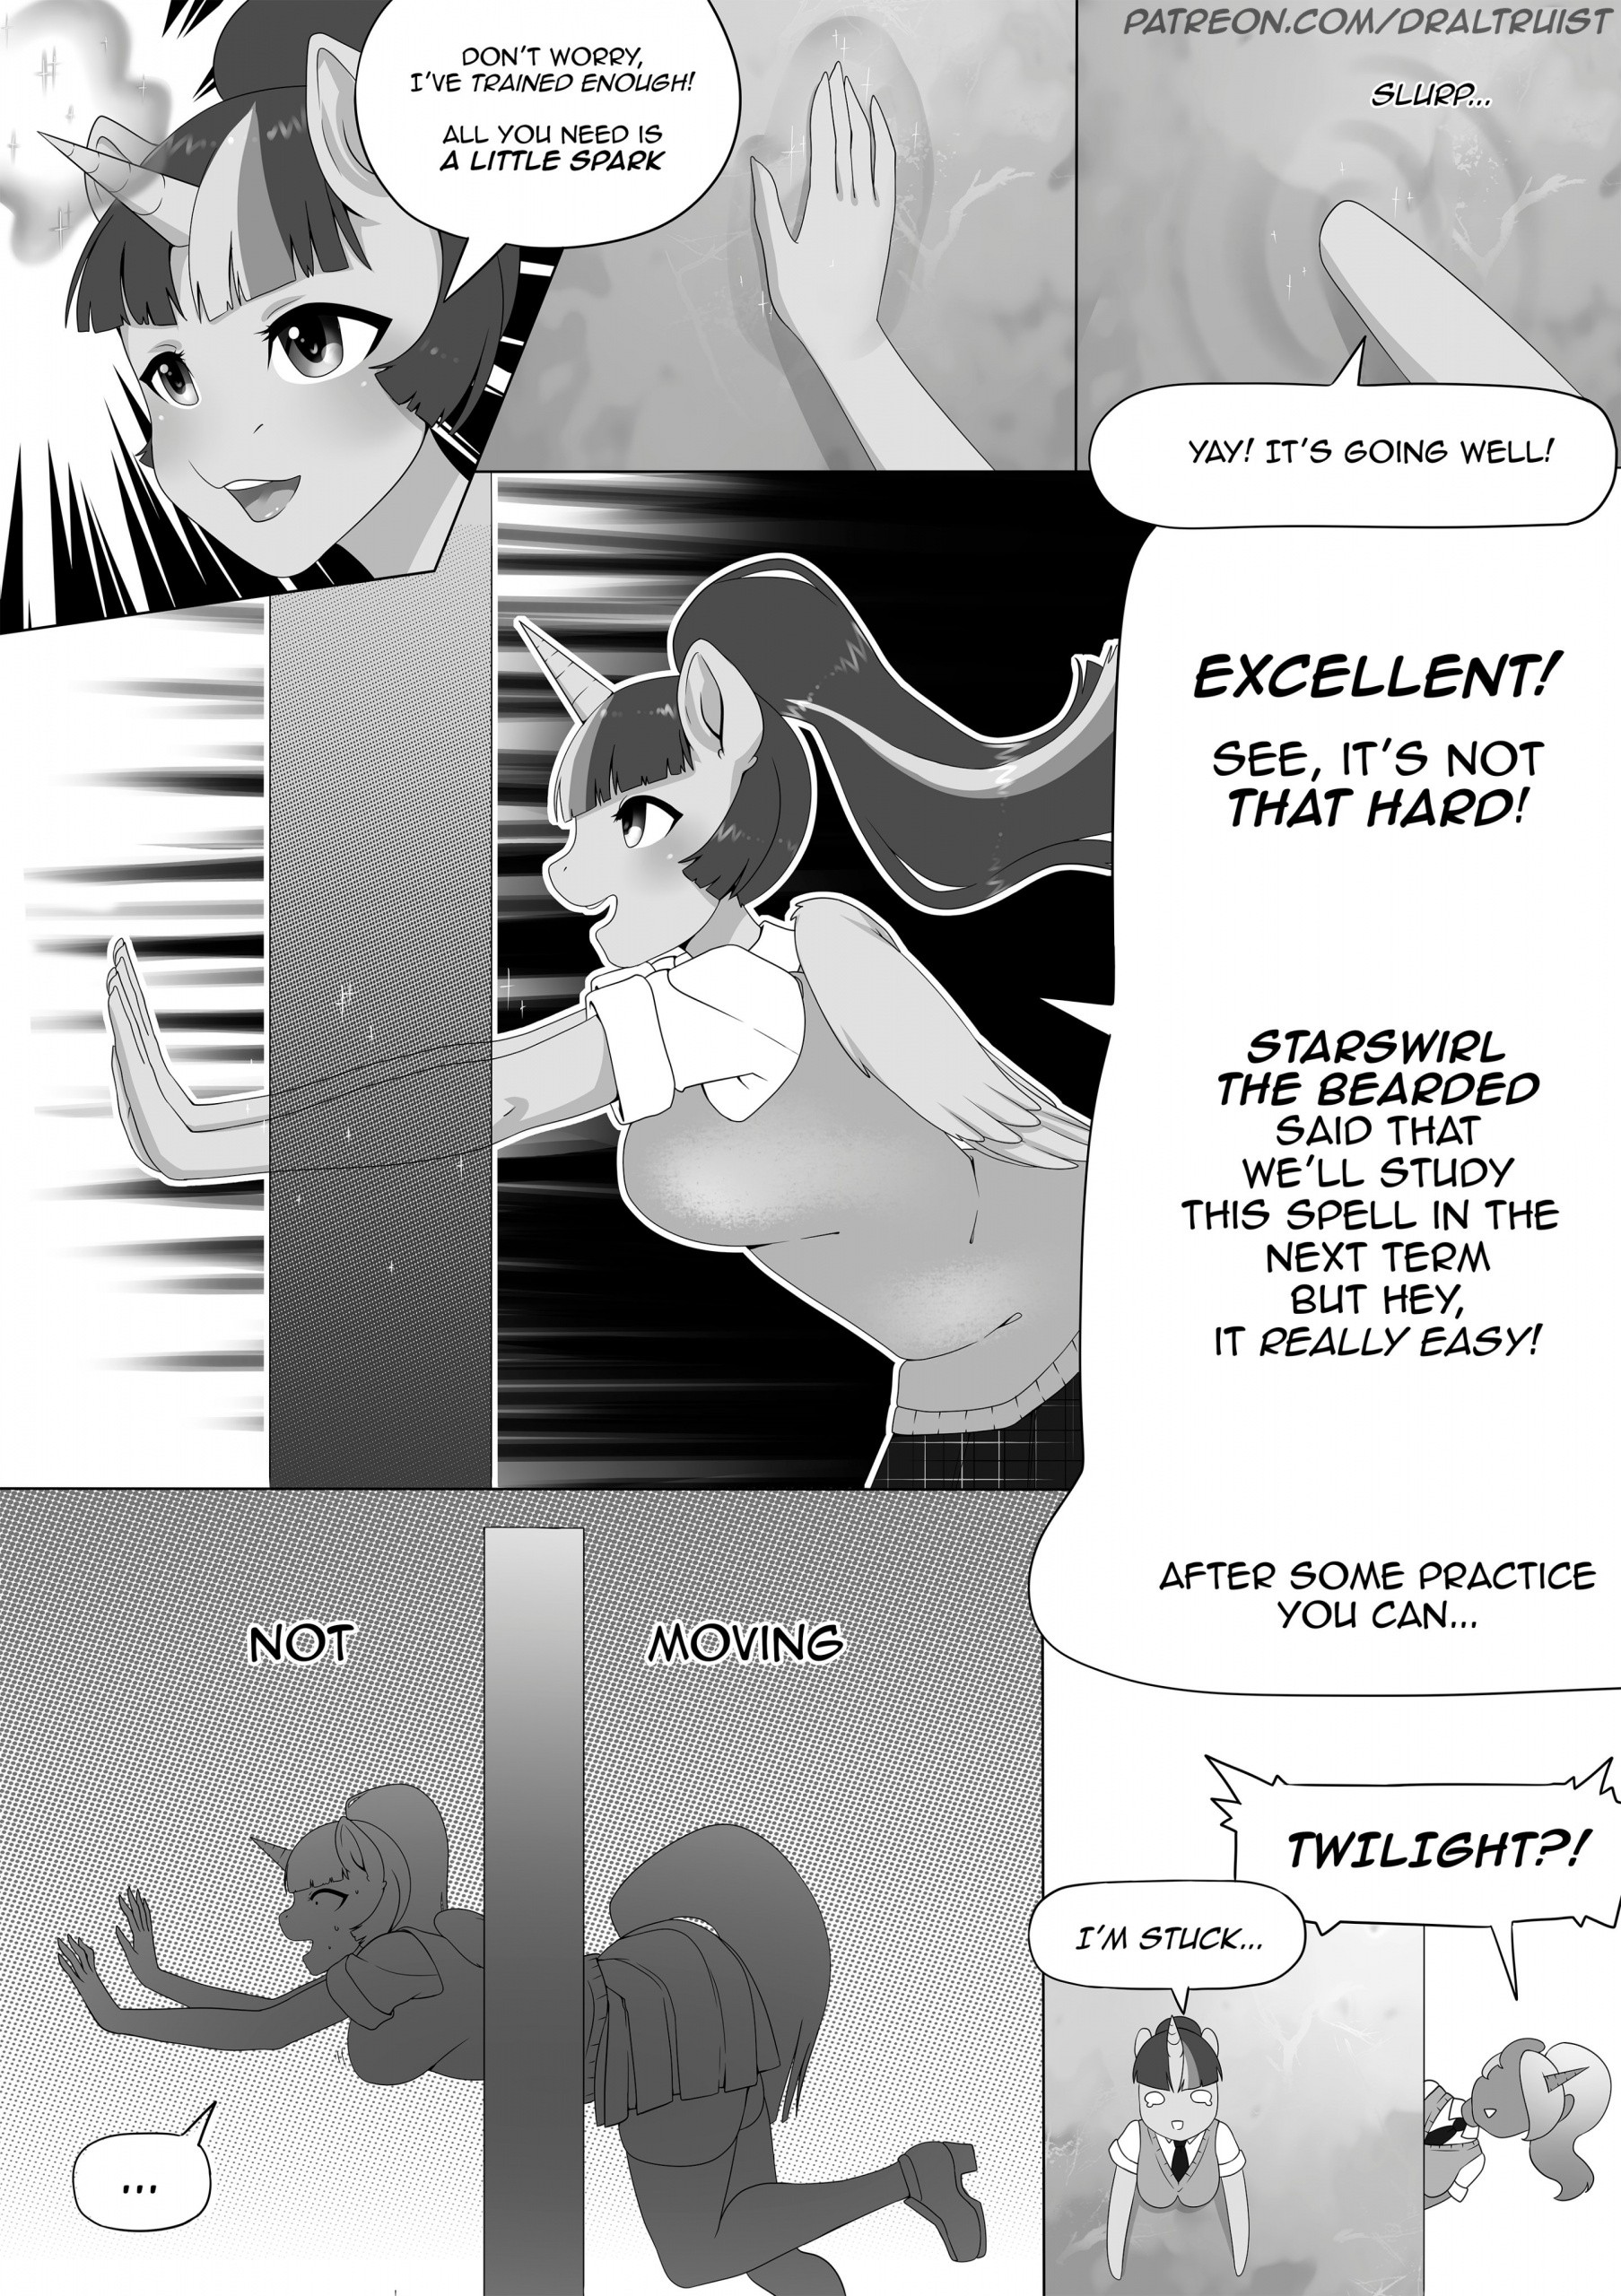 Twilight's New Spell porn comic picture 2